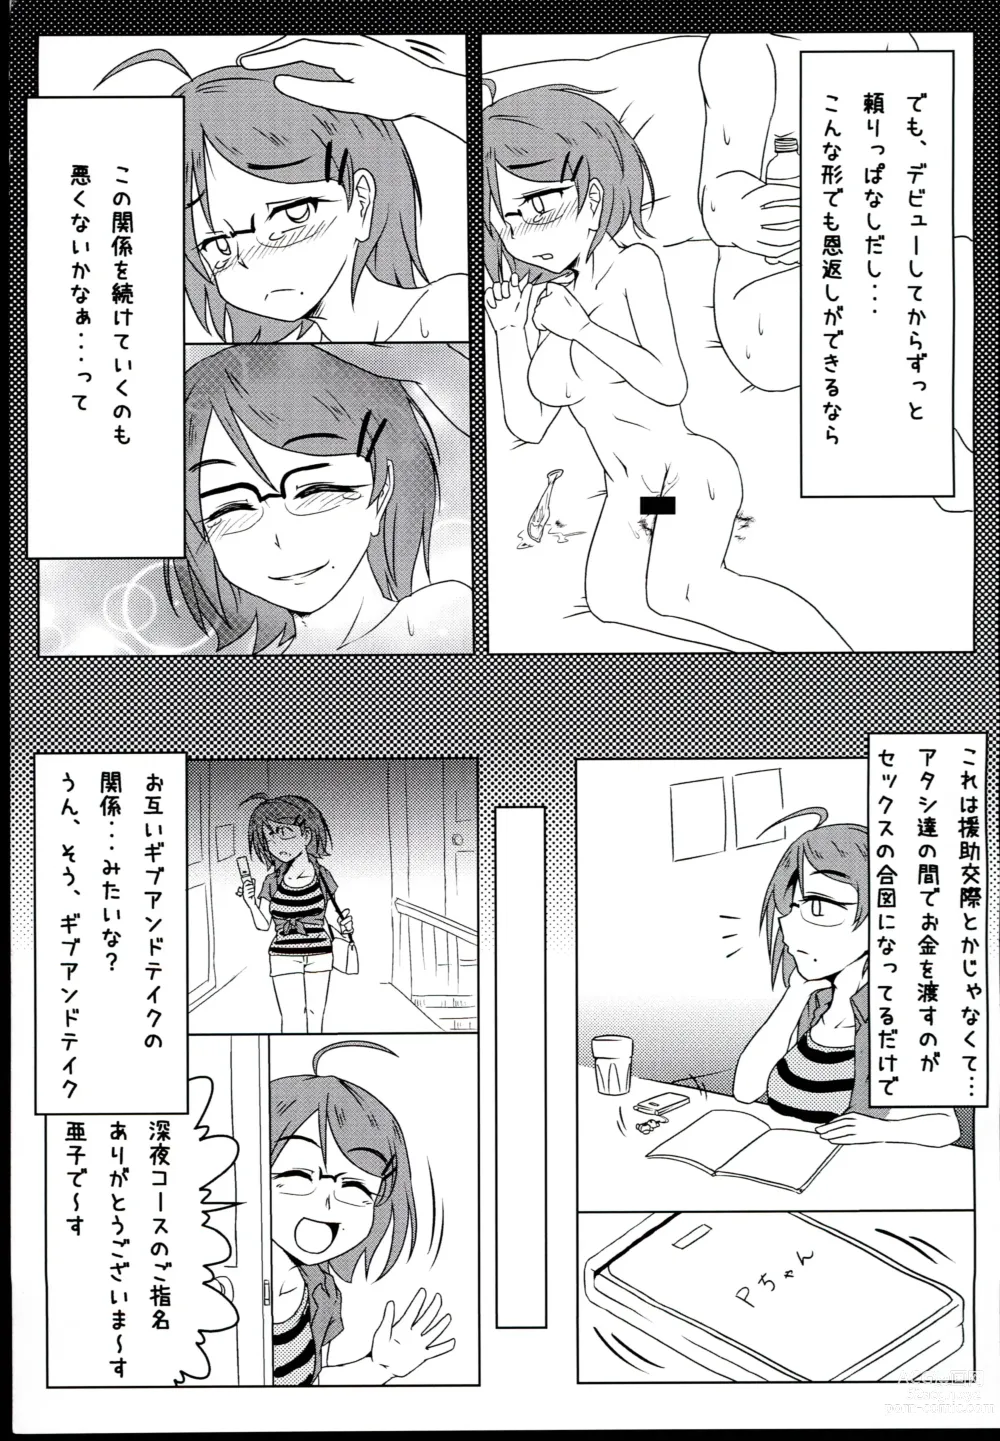 Page 5 of doujinshi After Zero